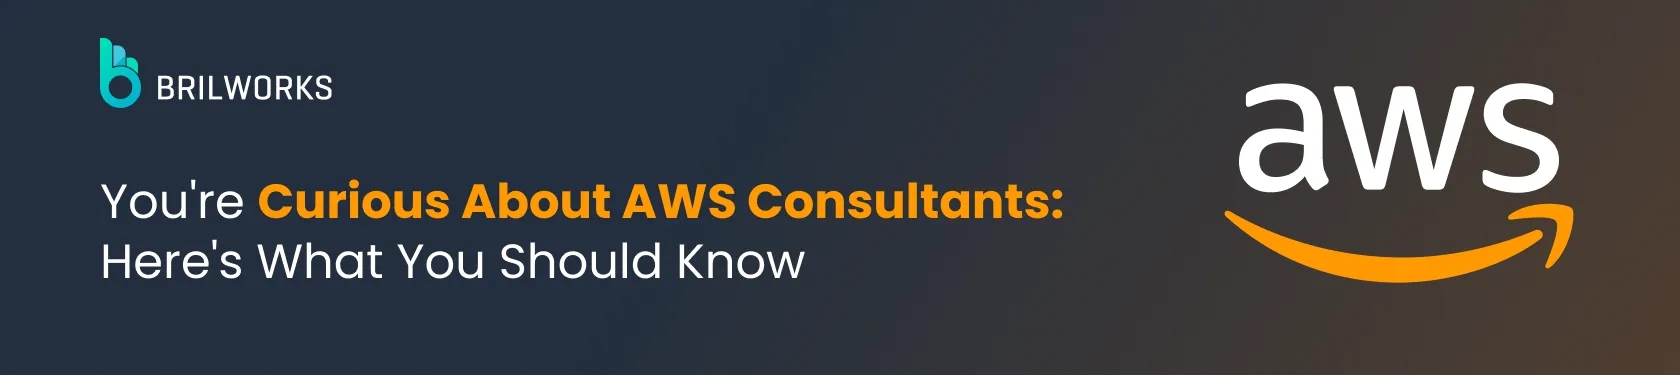 About AWS Consultants Mobile Banner Image